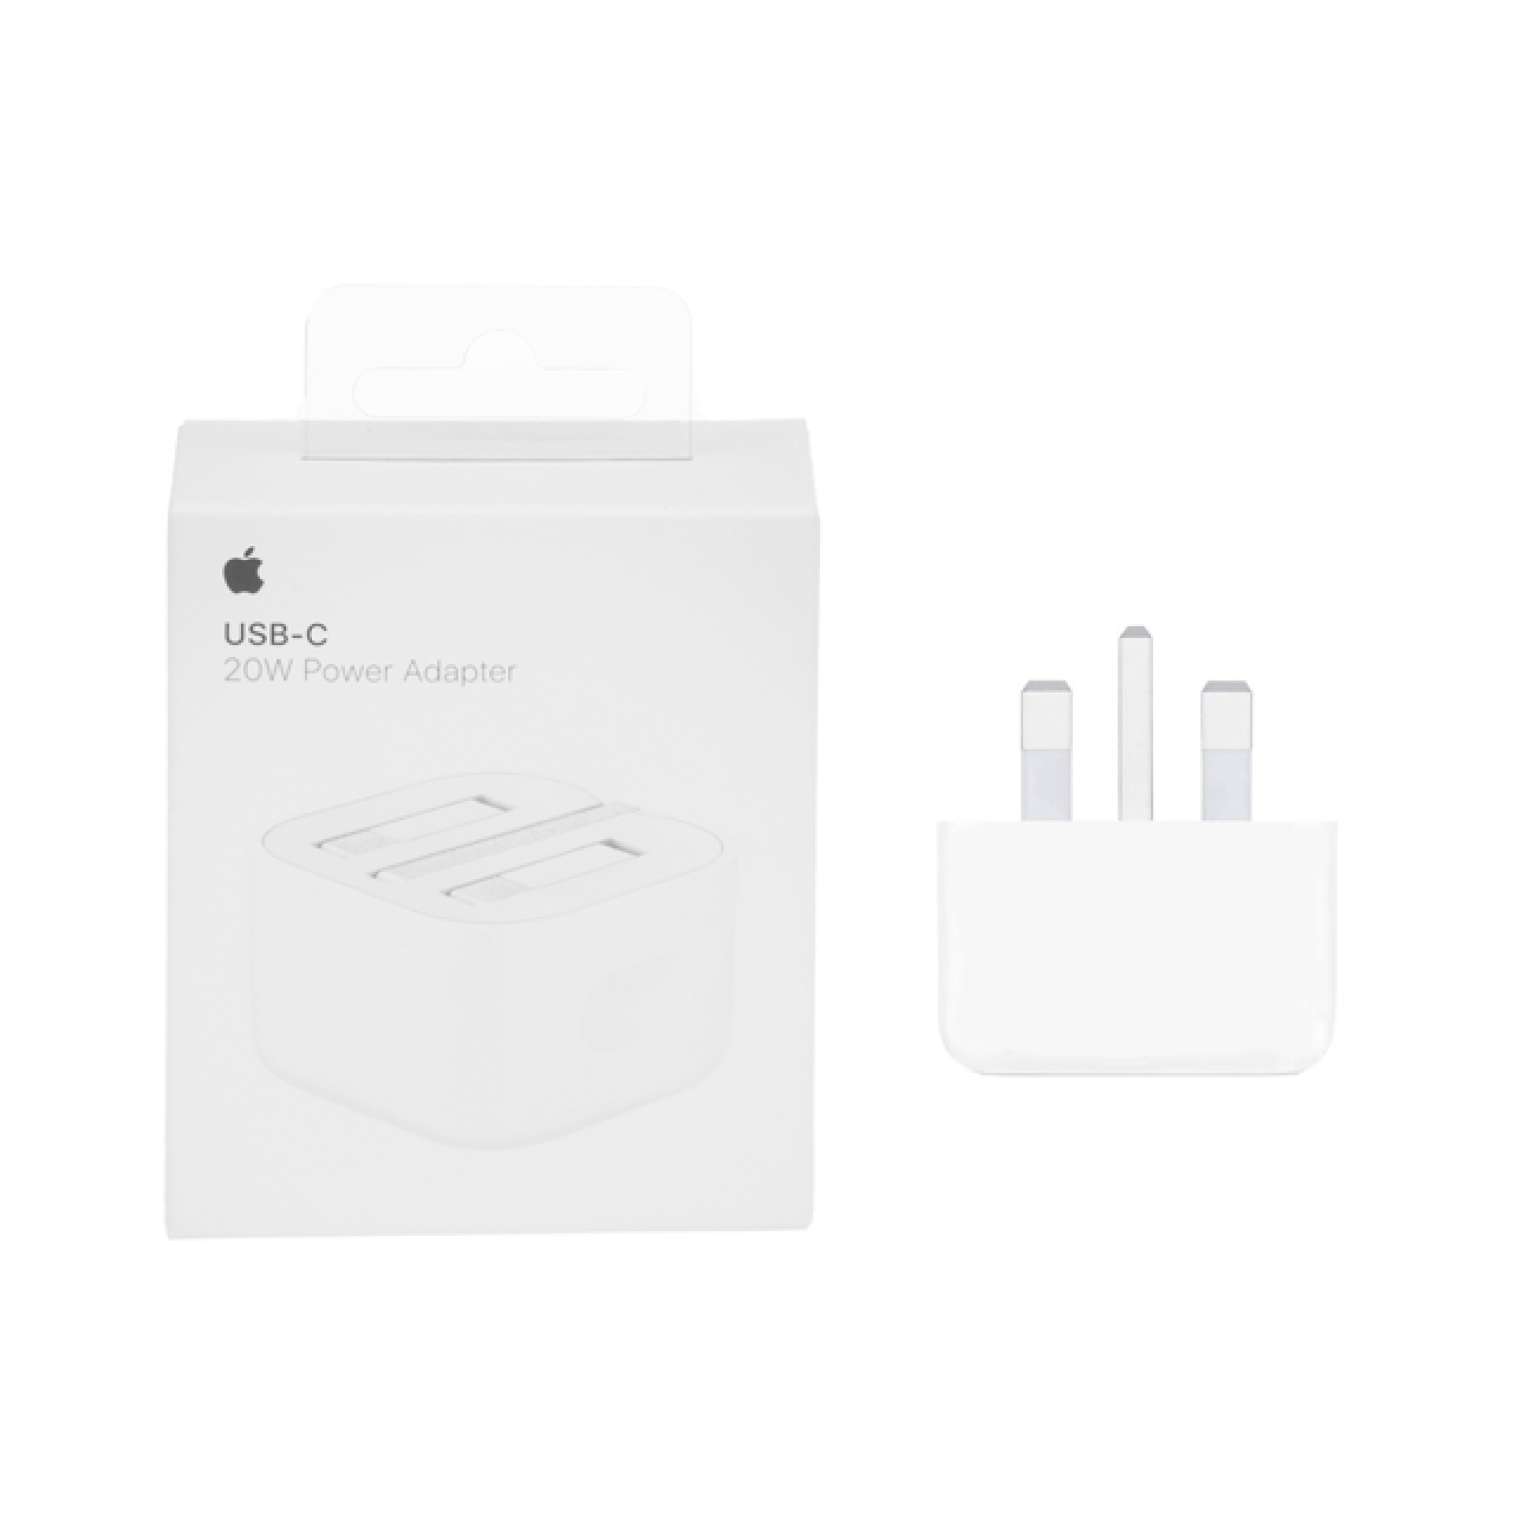 iPhone wall charger USB C model 20W ORG B A White DST.png 2